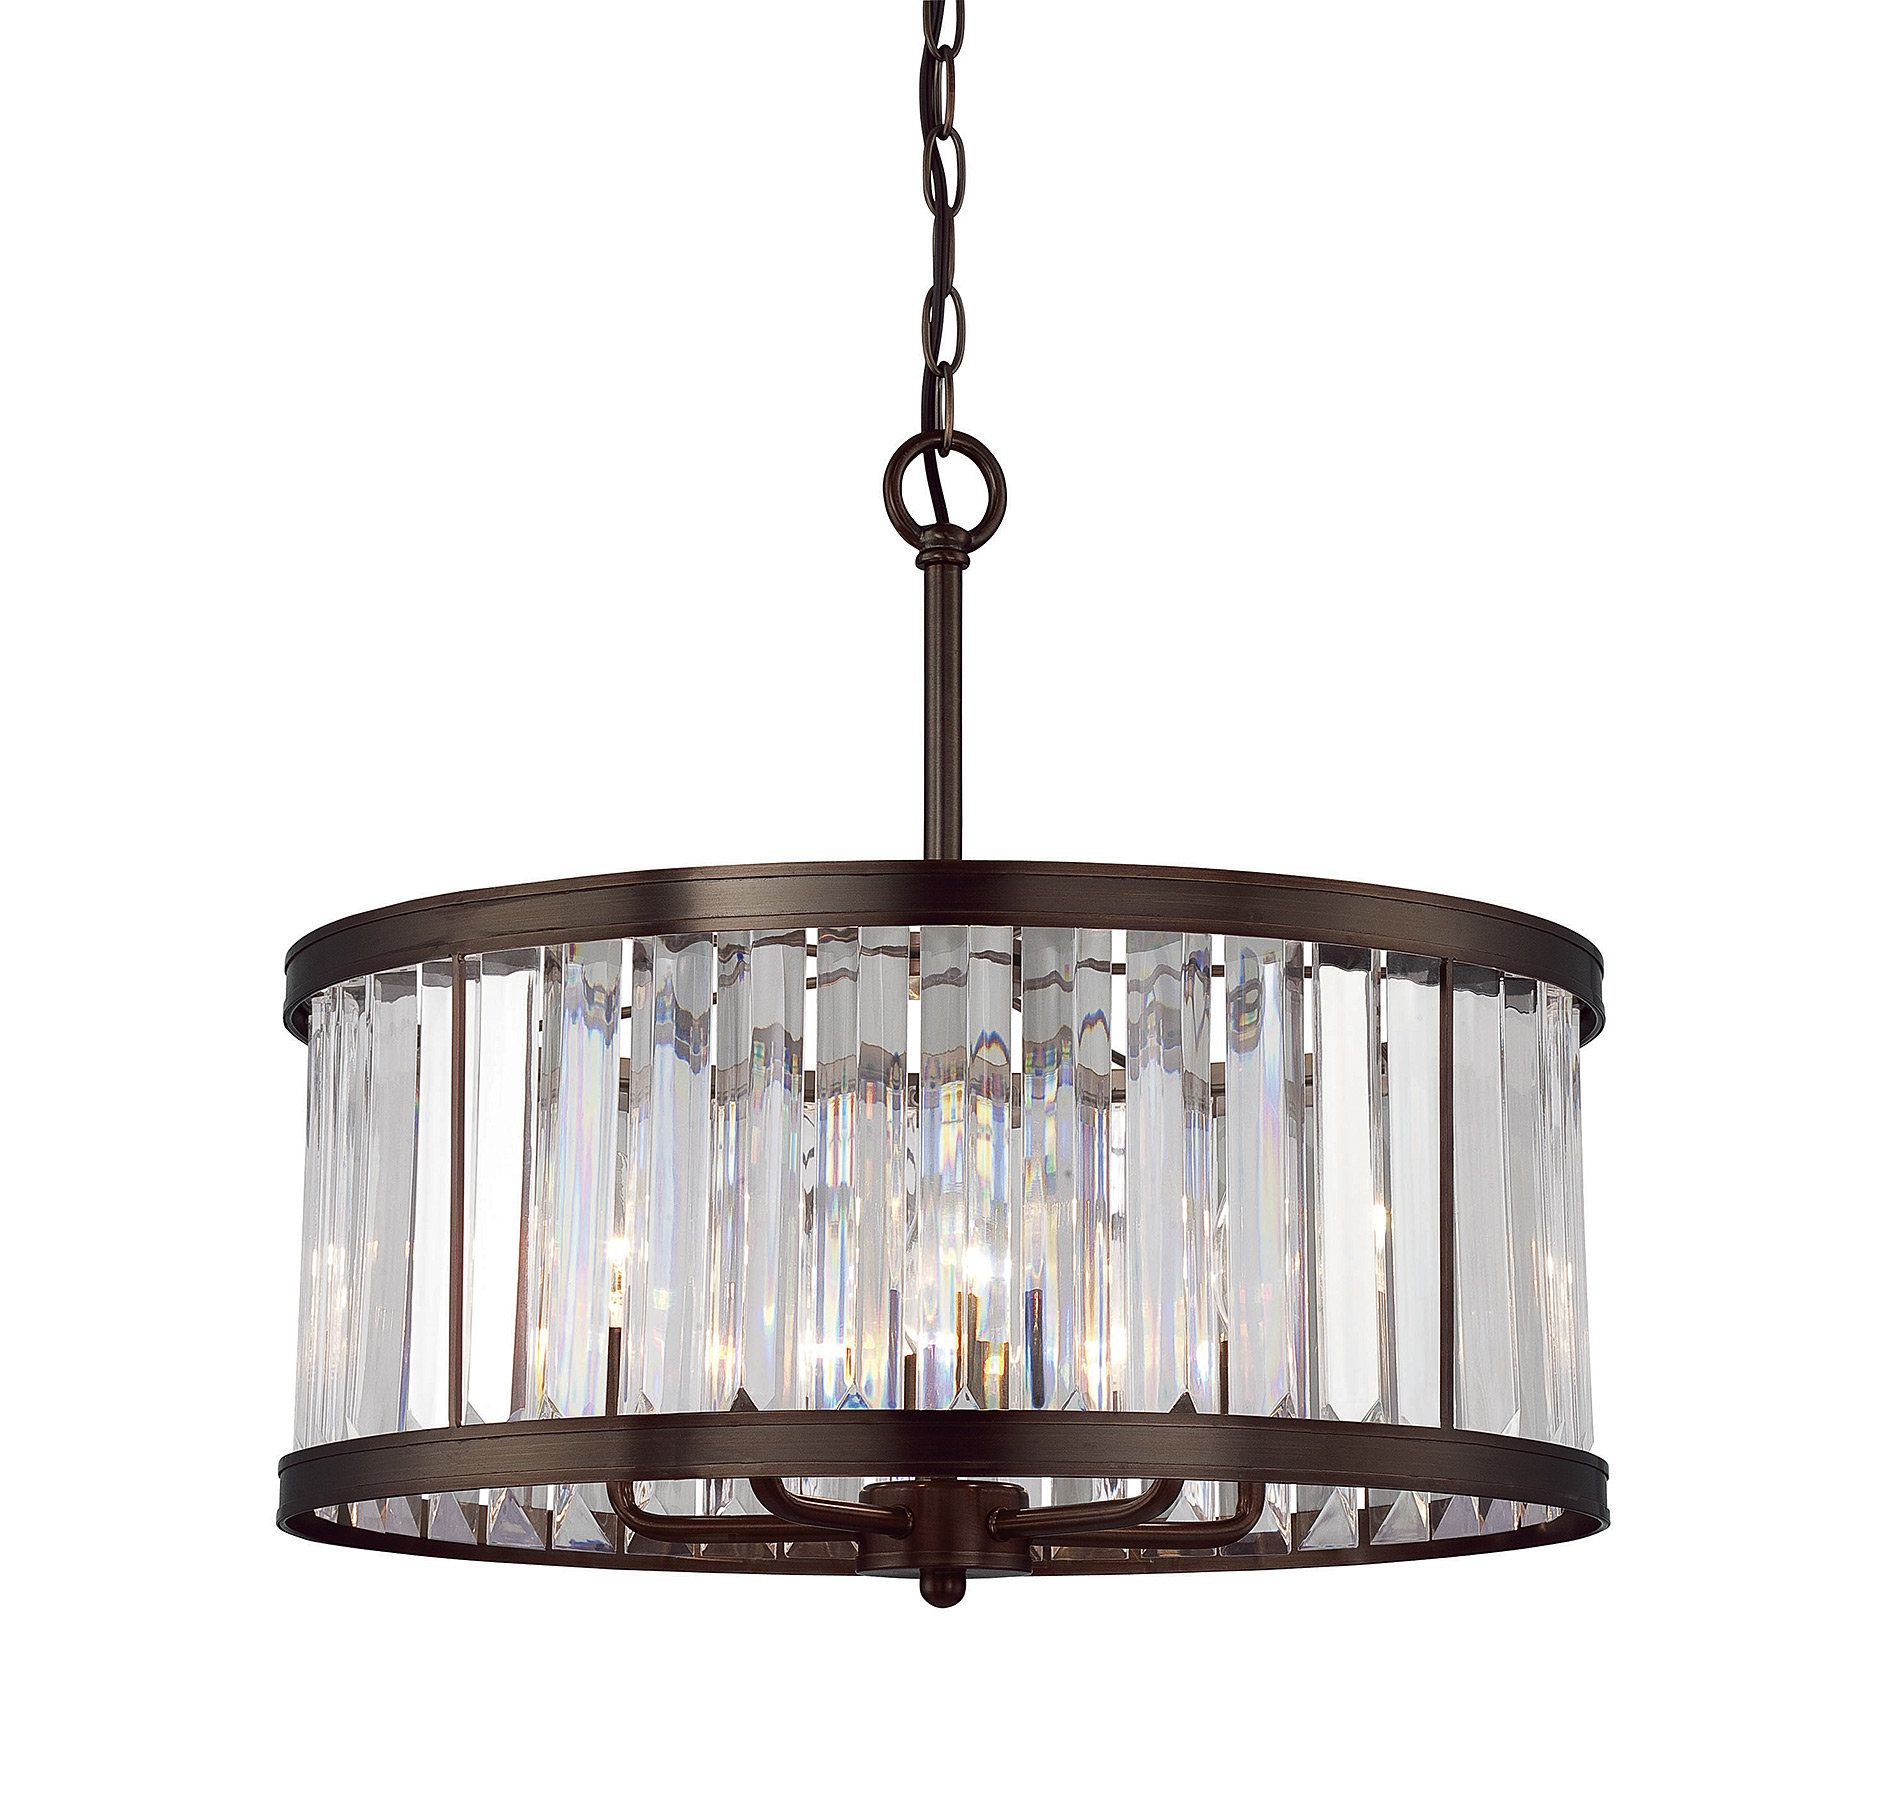 Apus 5 Light Crystal Chandelier In Breithaup 7 Light Drum Chandeliers (View 28 of 30)